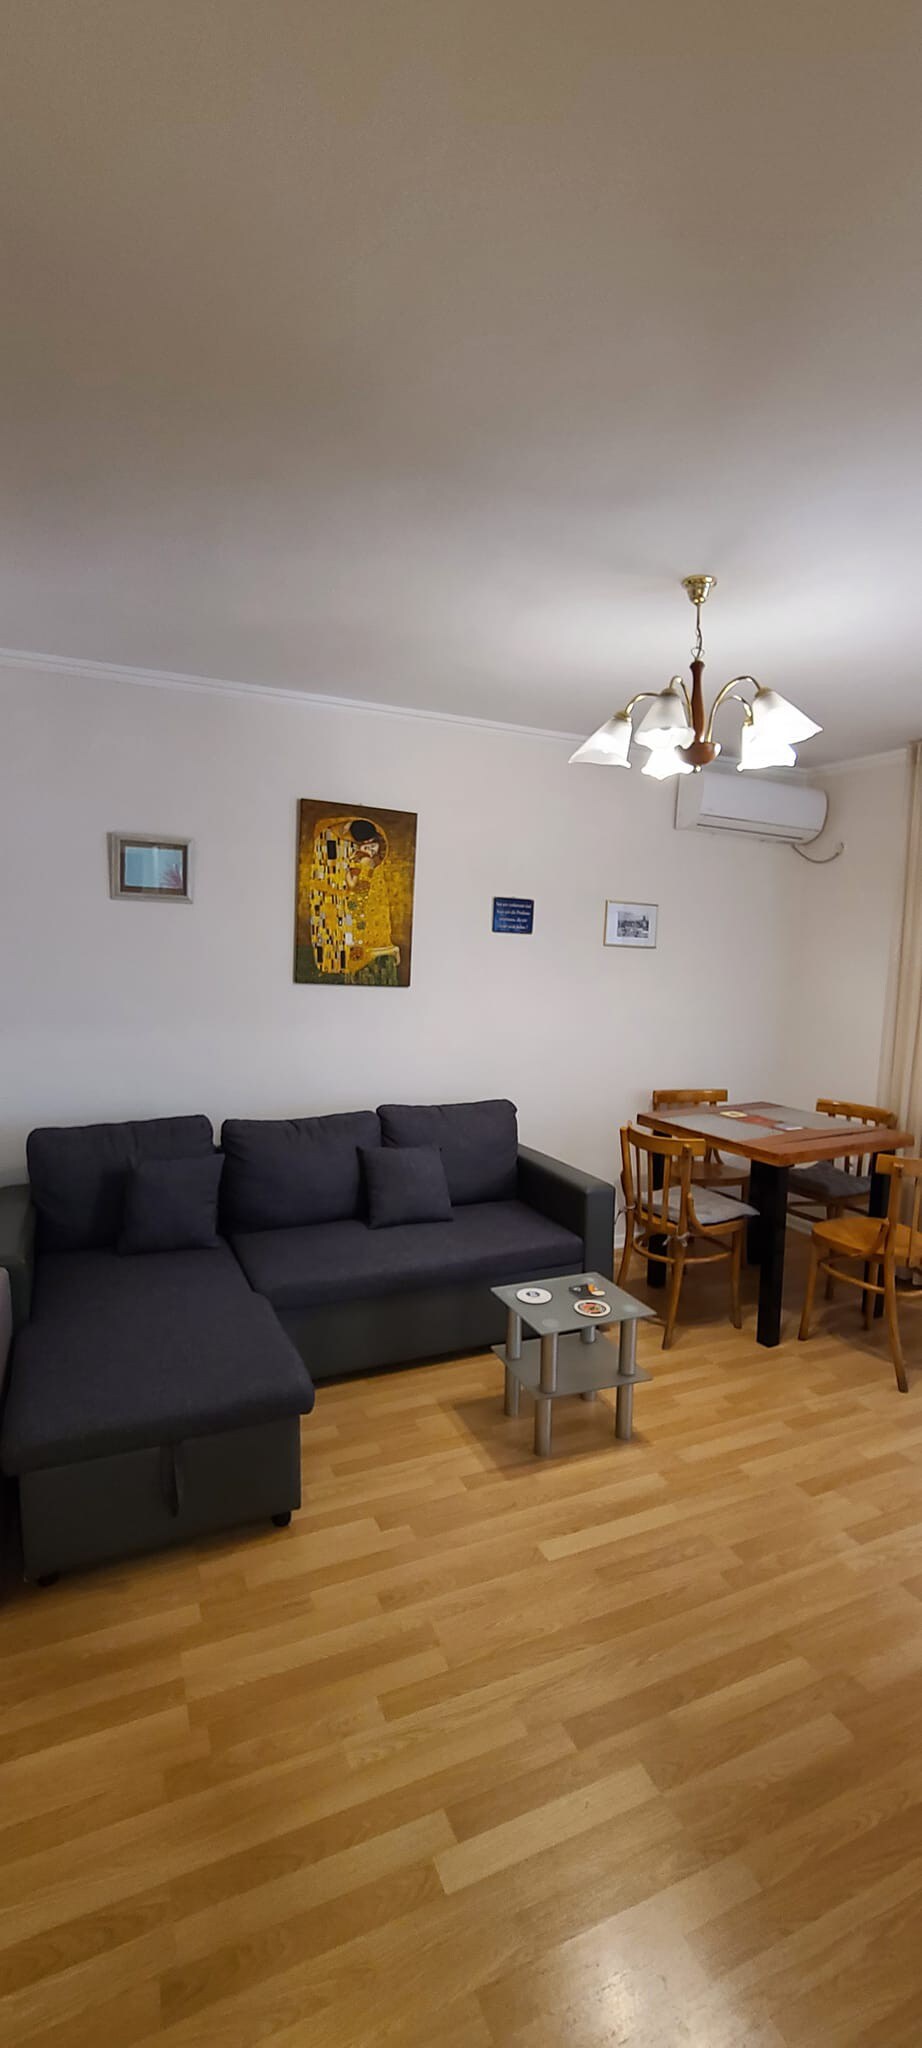 Shared Flat Close to City Center